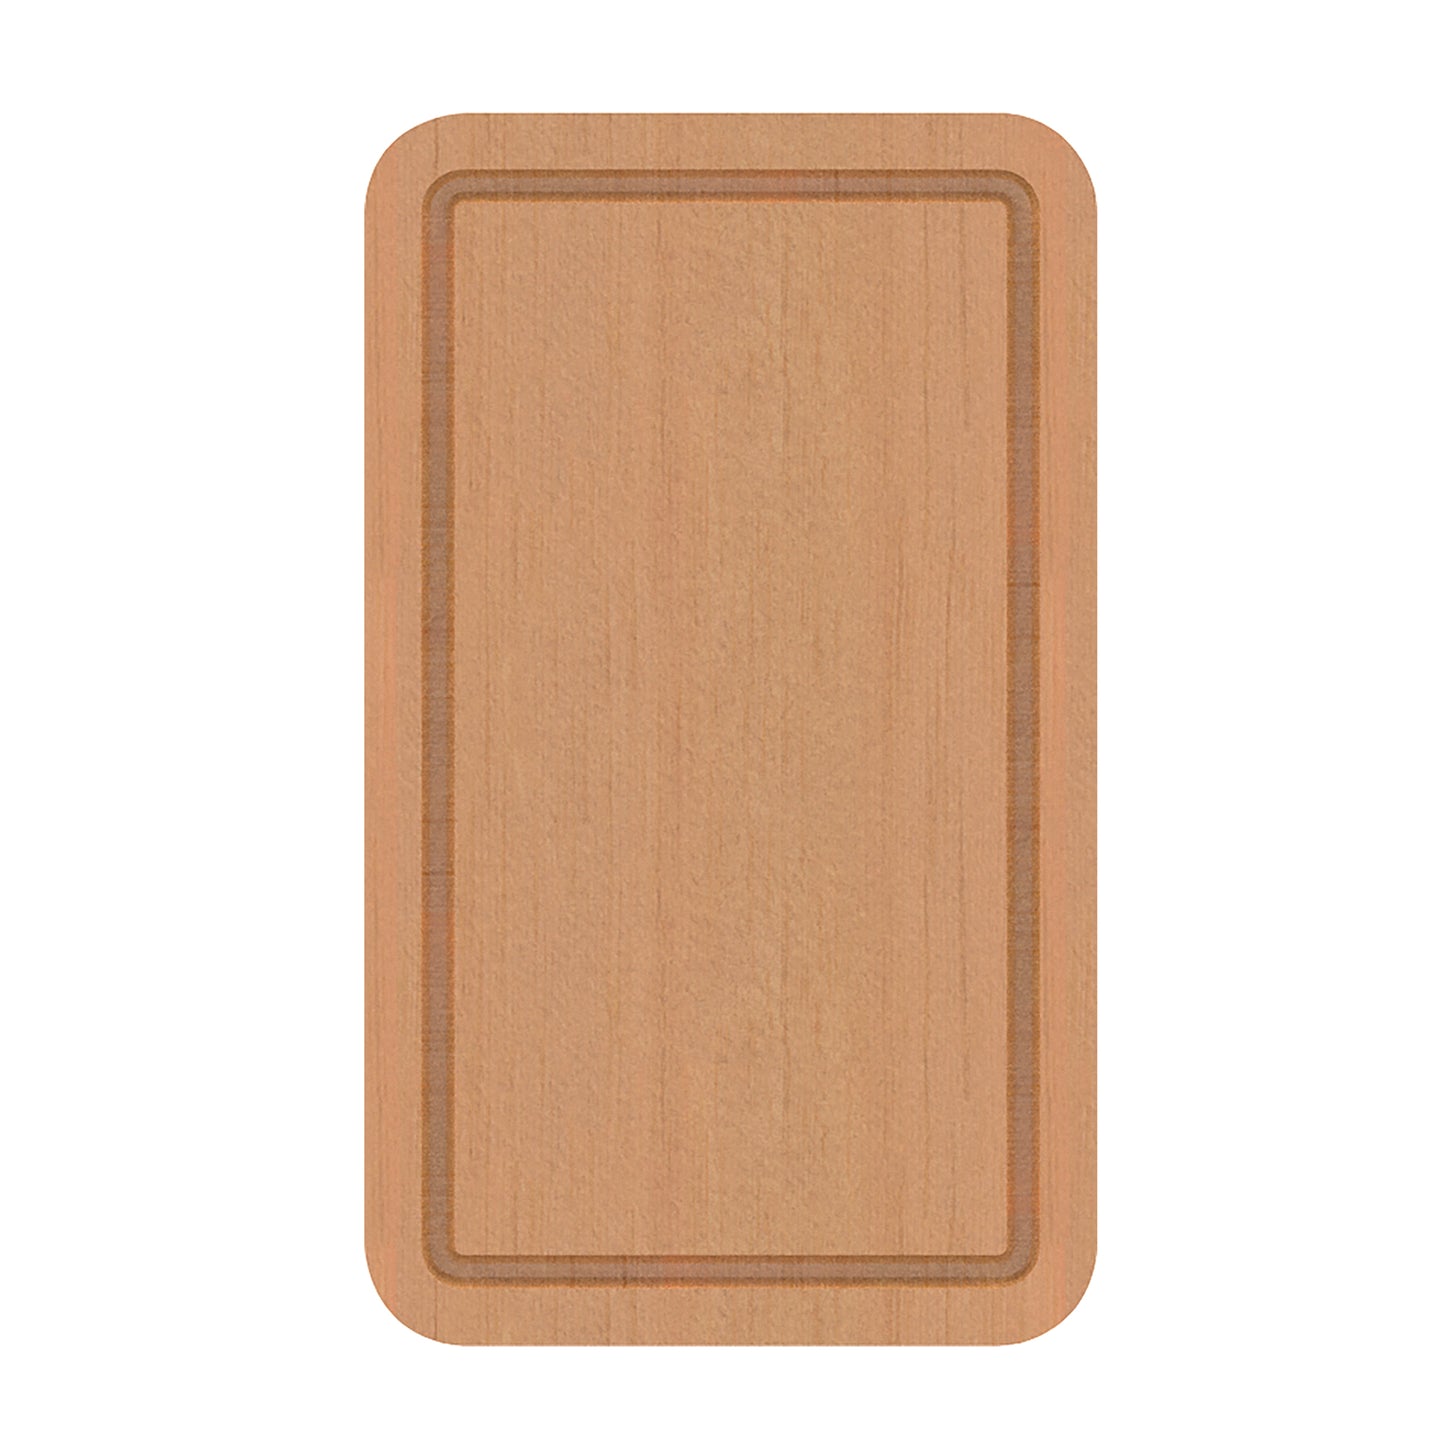 FRANKE PT-41S 11.0-in. x 18.5-in. Solid Wood Cutting Board for Pescara Series Sinks